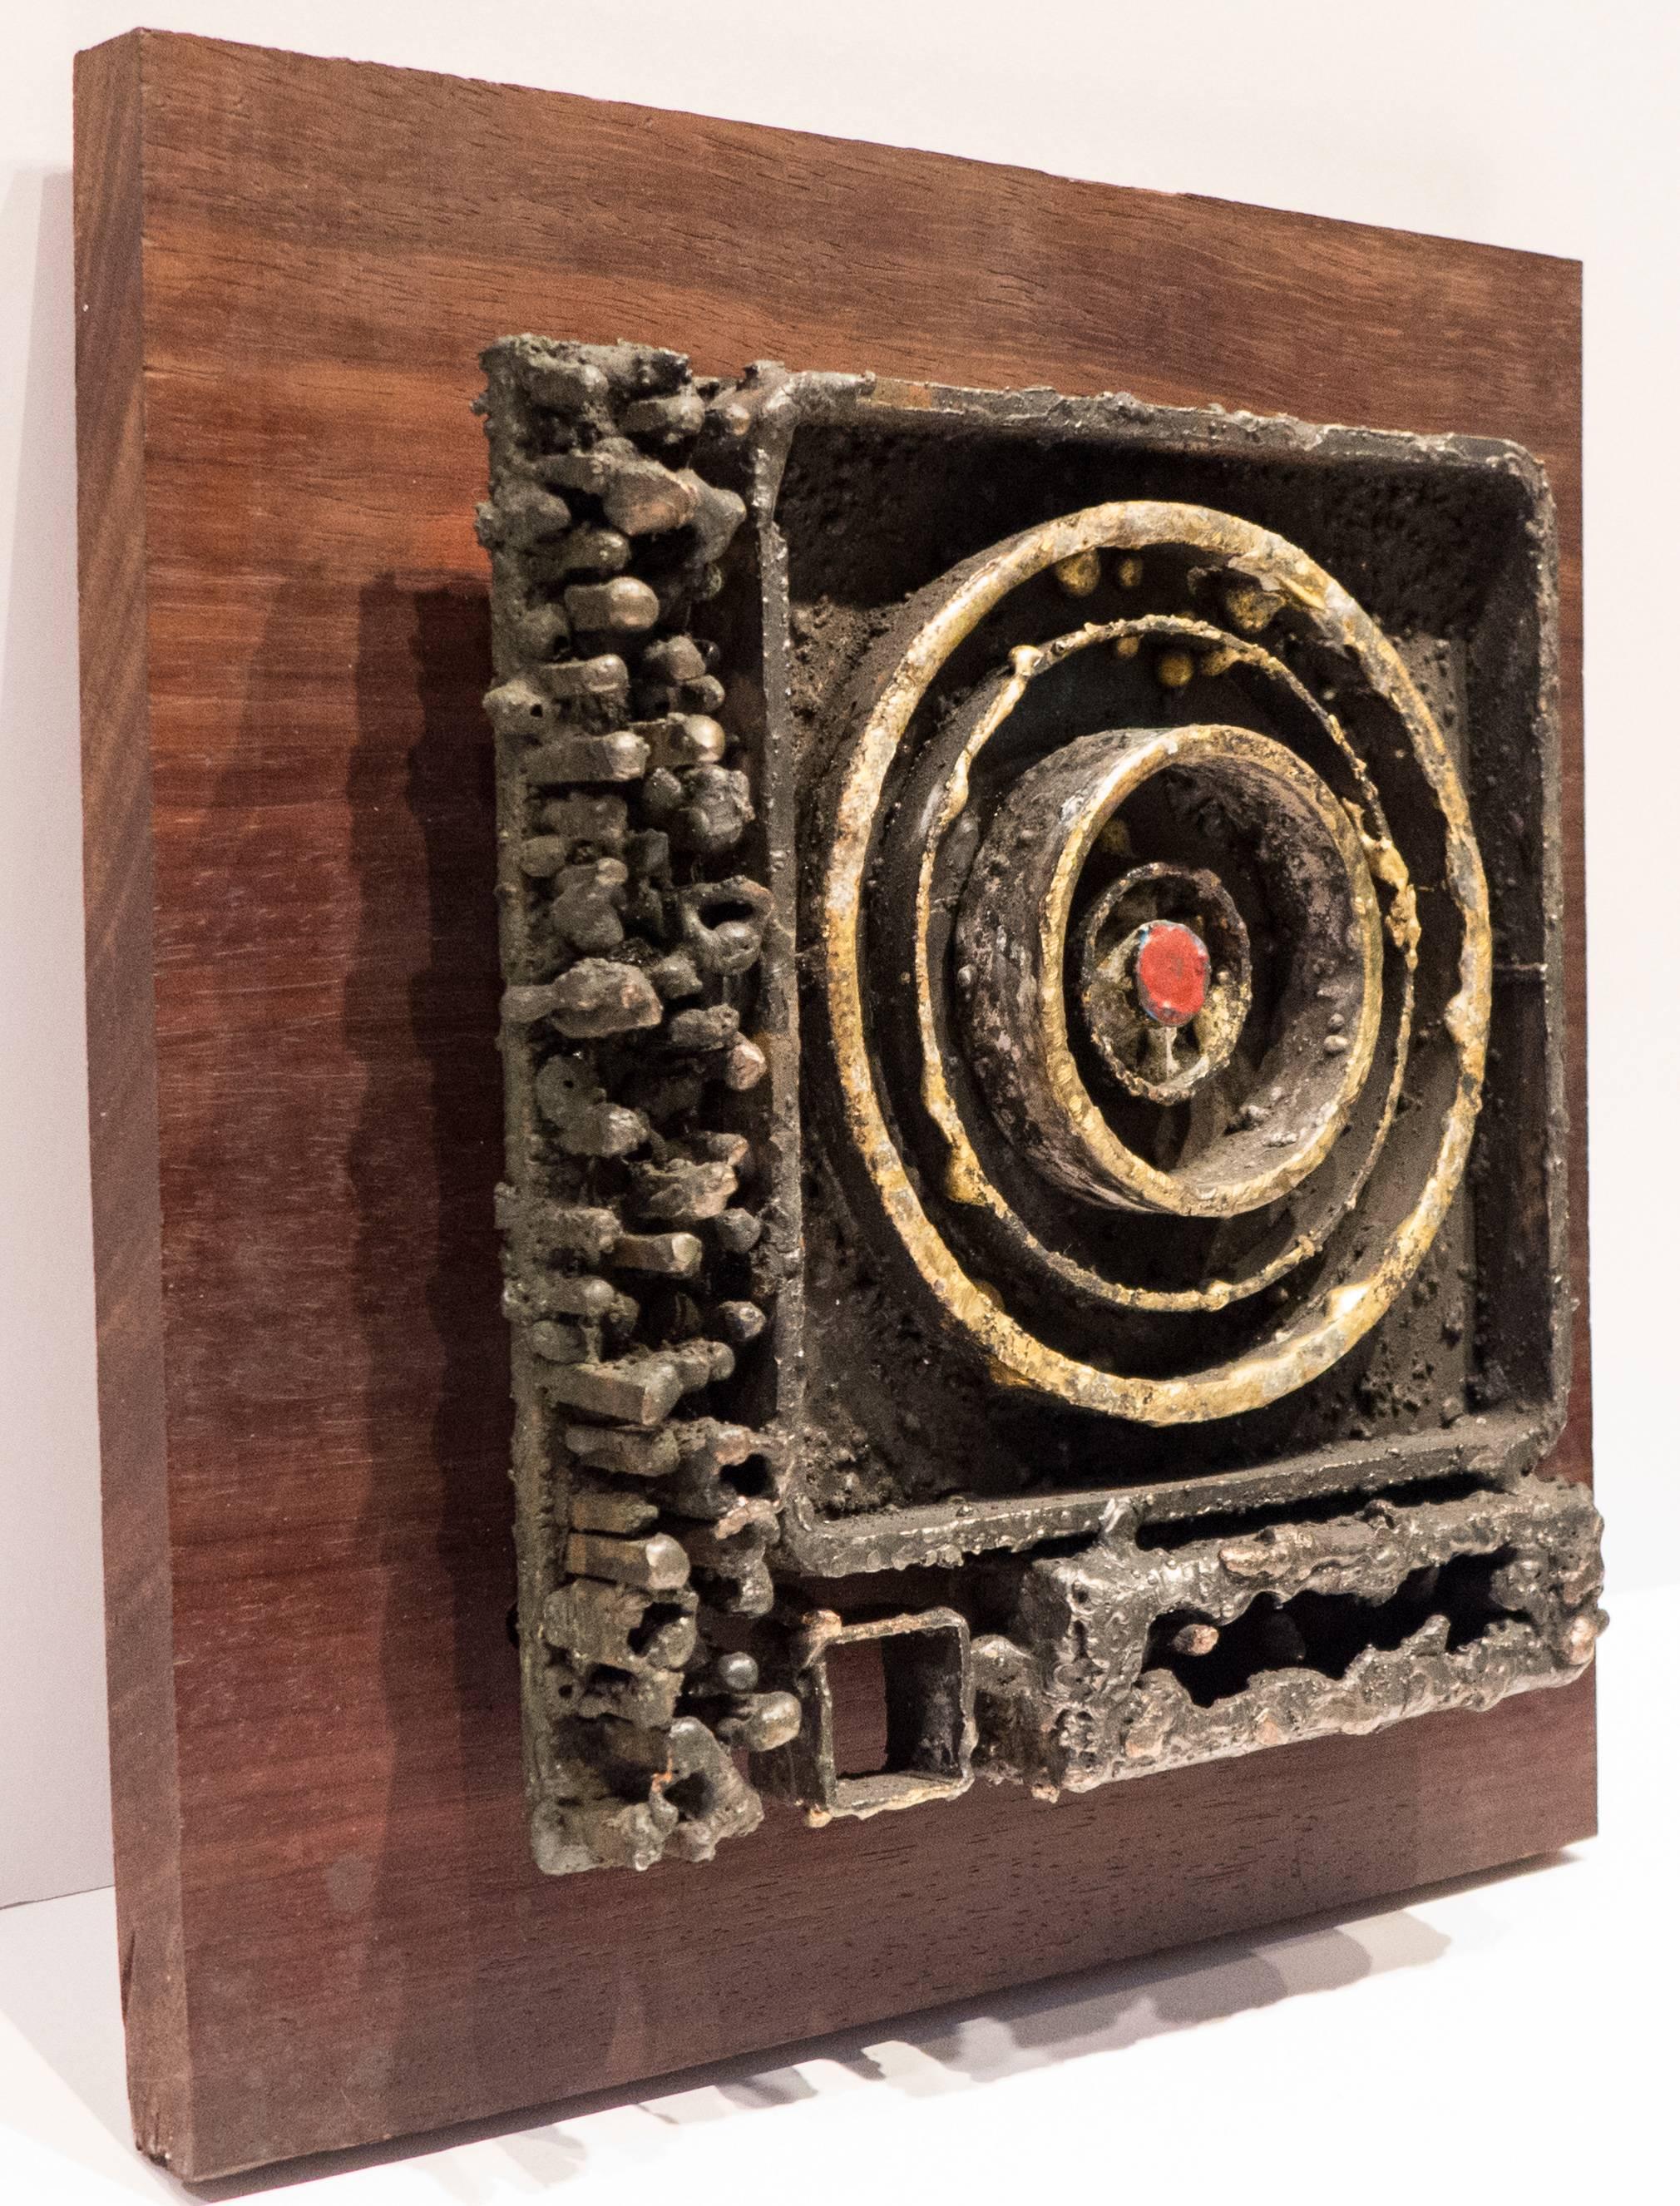 Brutalist abstract relief of blackened steel with fused bronze, copper, and glass enamel. Mounted on a wooden board. Titled 